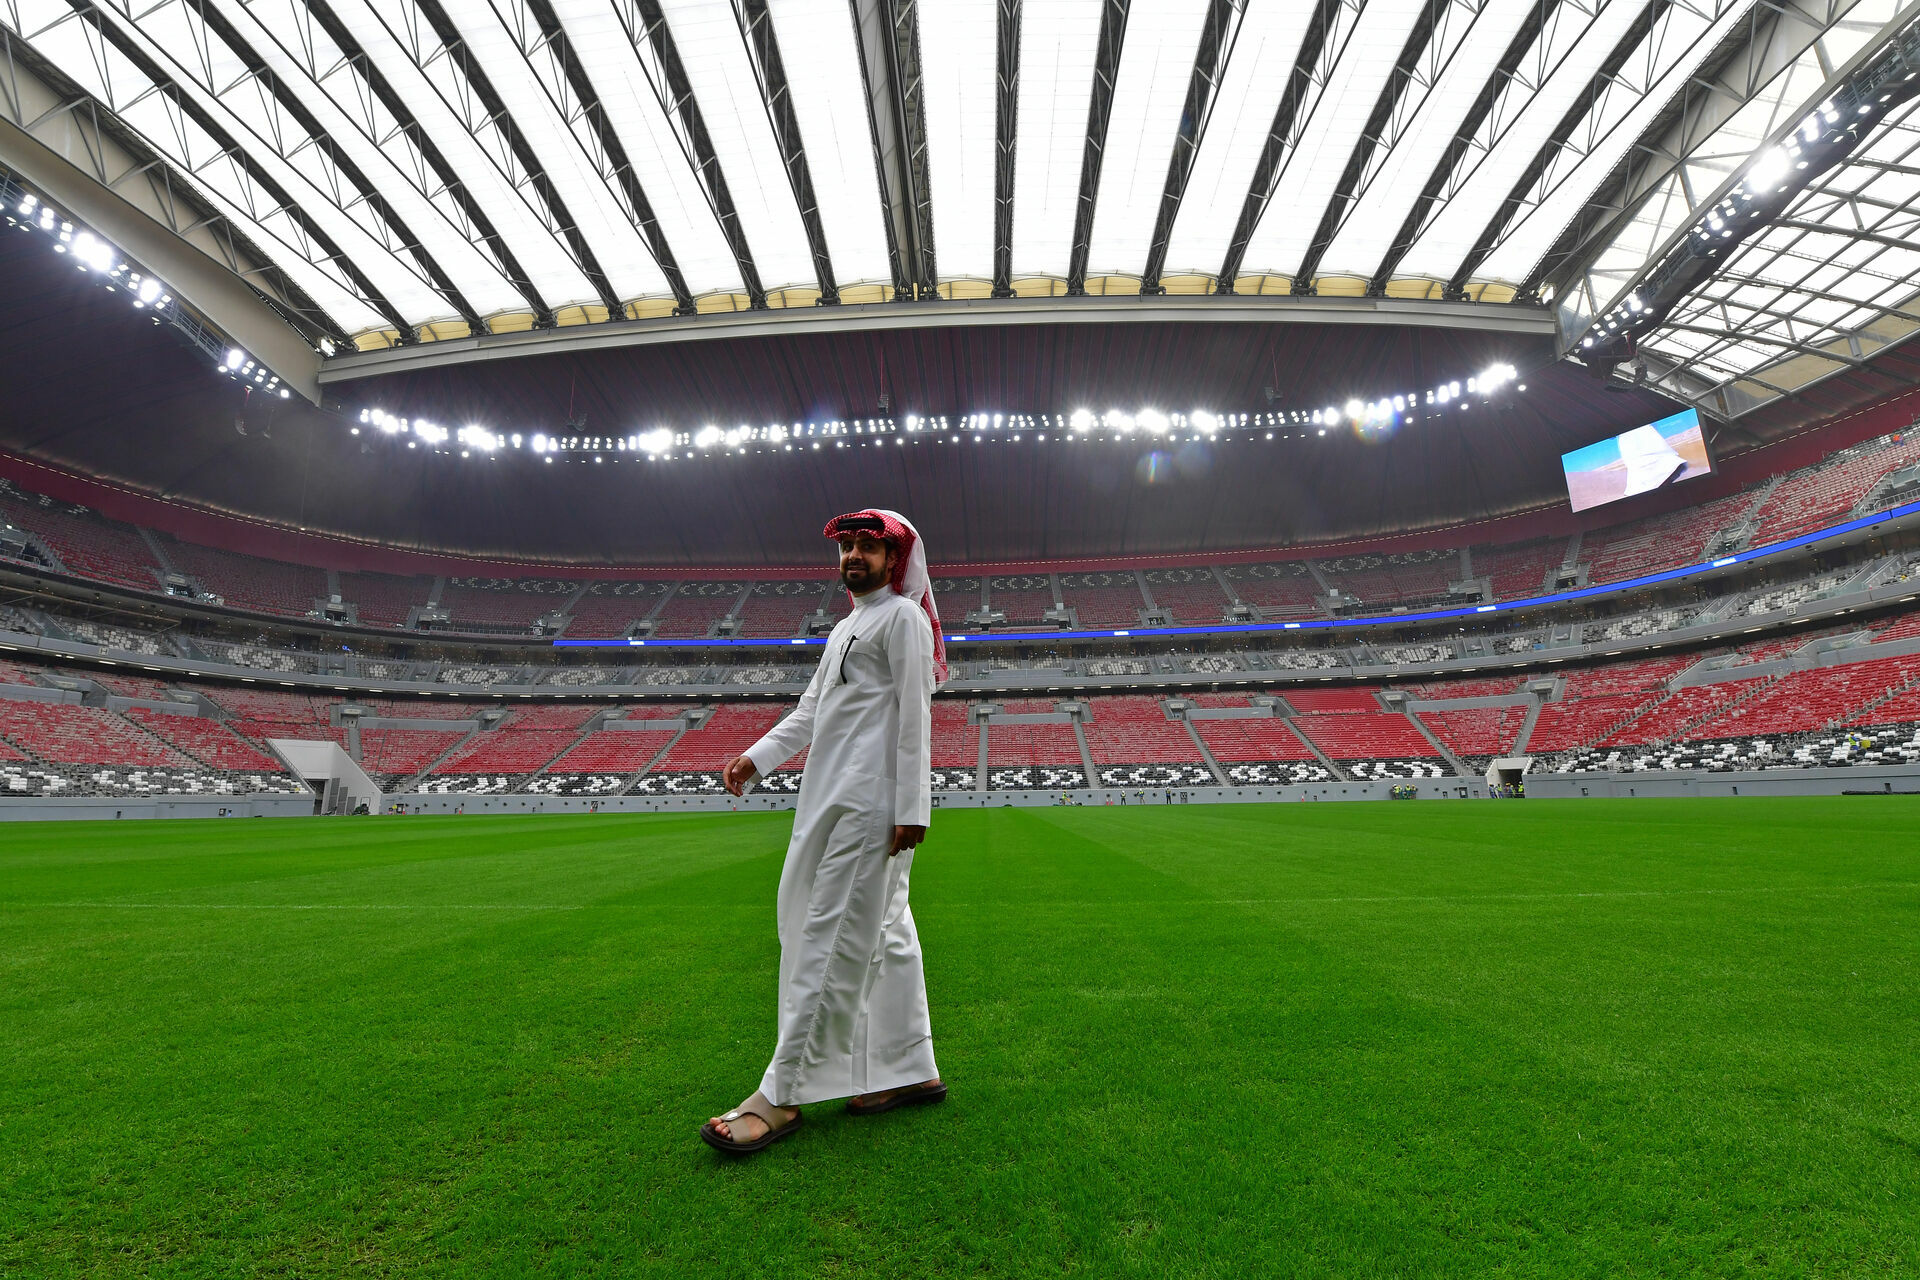 World Cup in Qatar has already fed millions of the poor